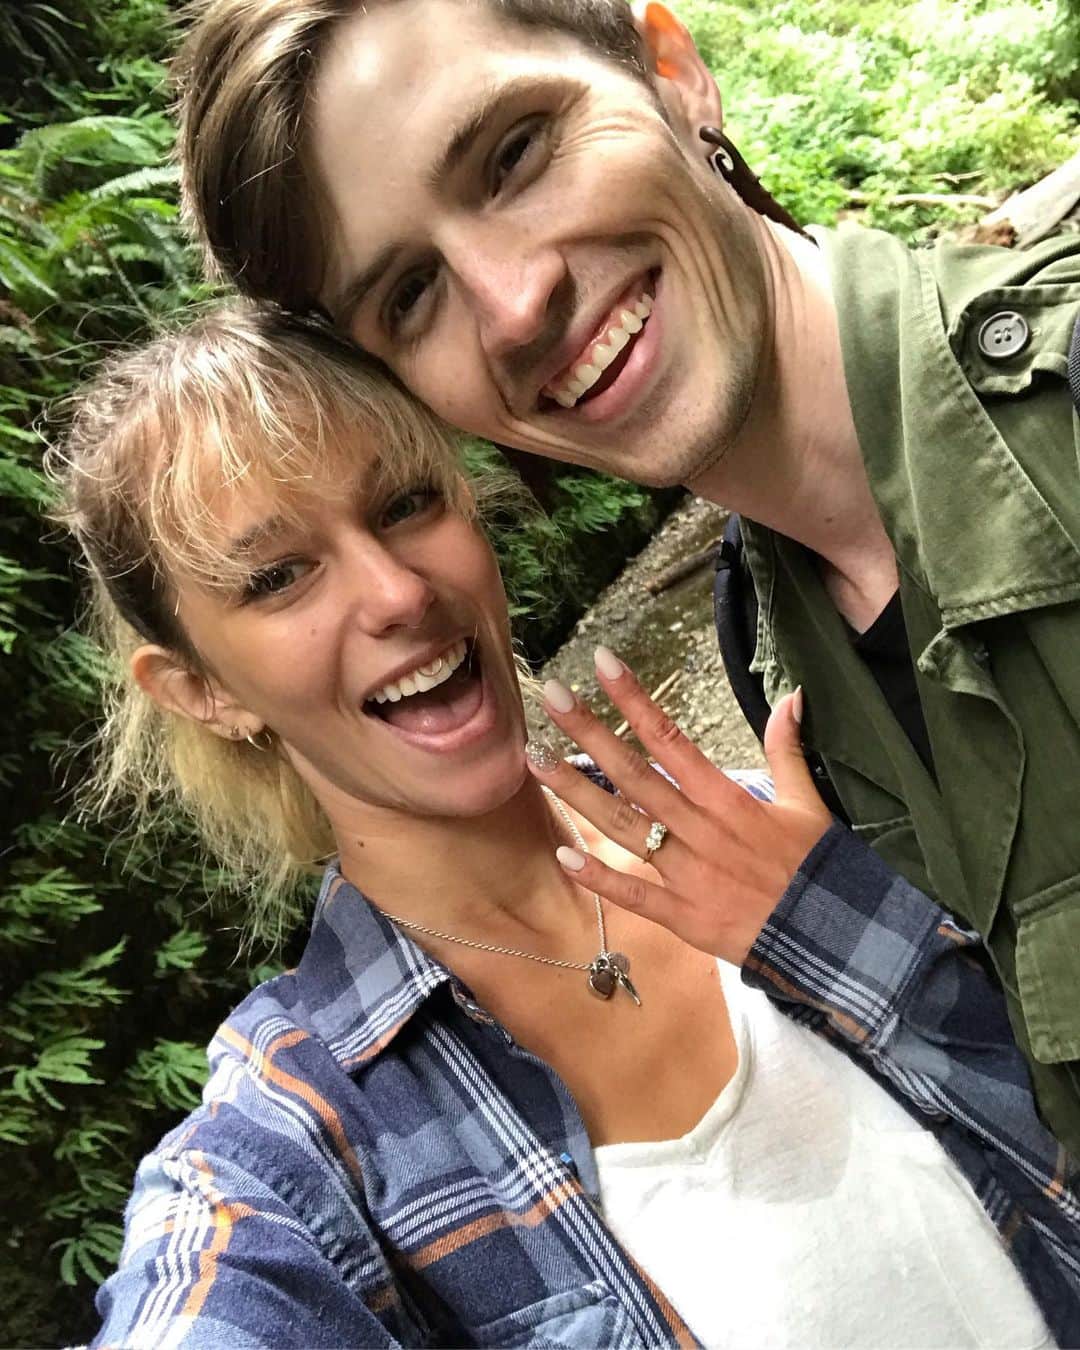 Breonne Rittingerのインスタグラム：「Hiked into the Redwoods with my boyfriend and left with my fiancé! ❤️💍 #engaged #redwoods #fiance #cowan2020」